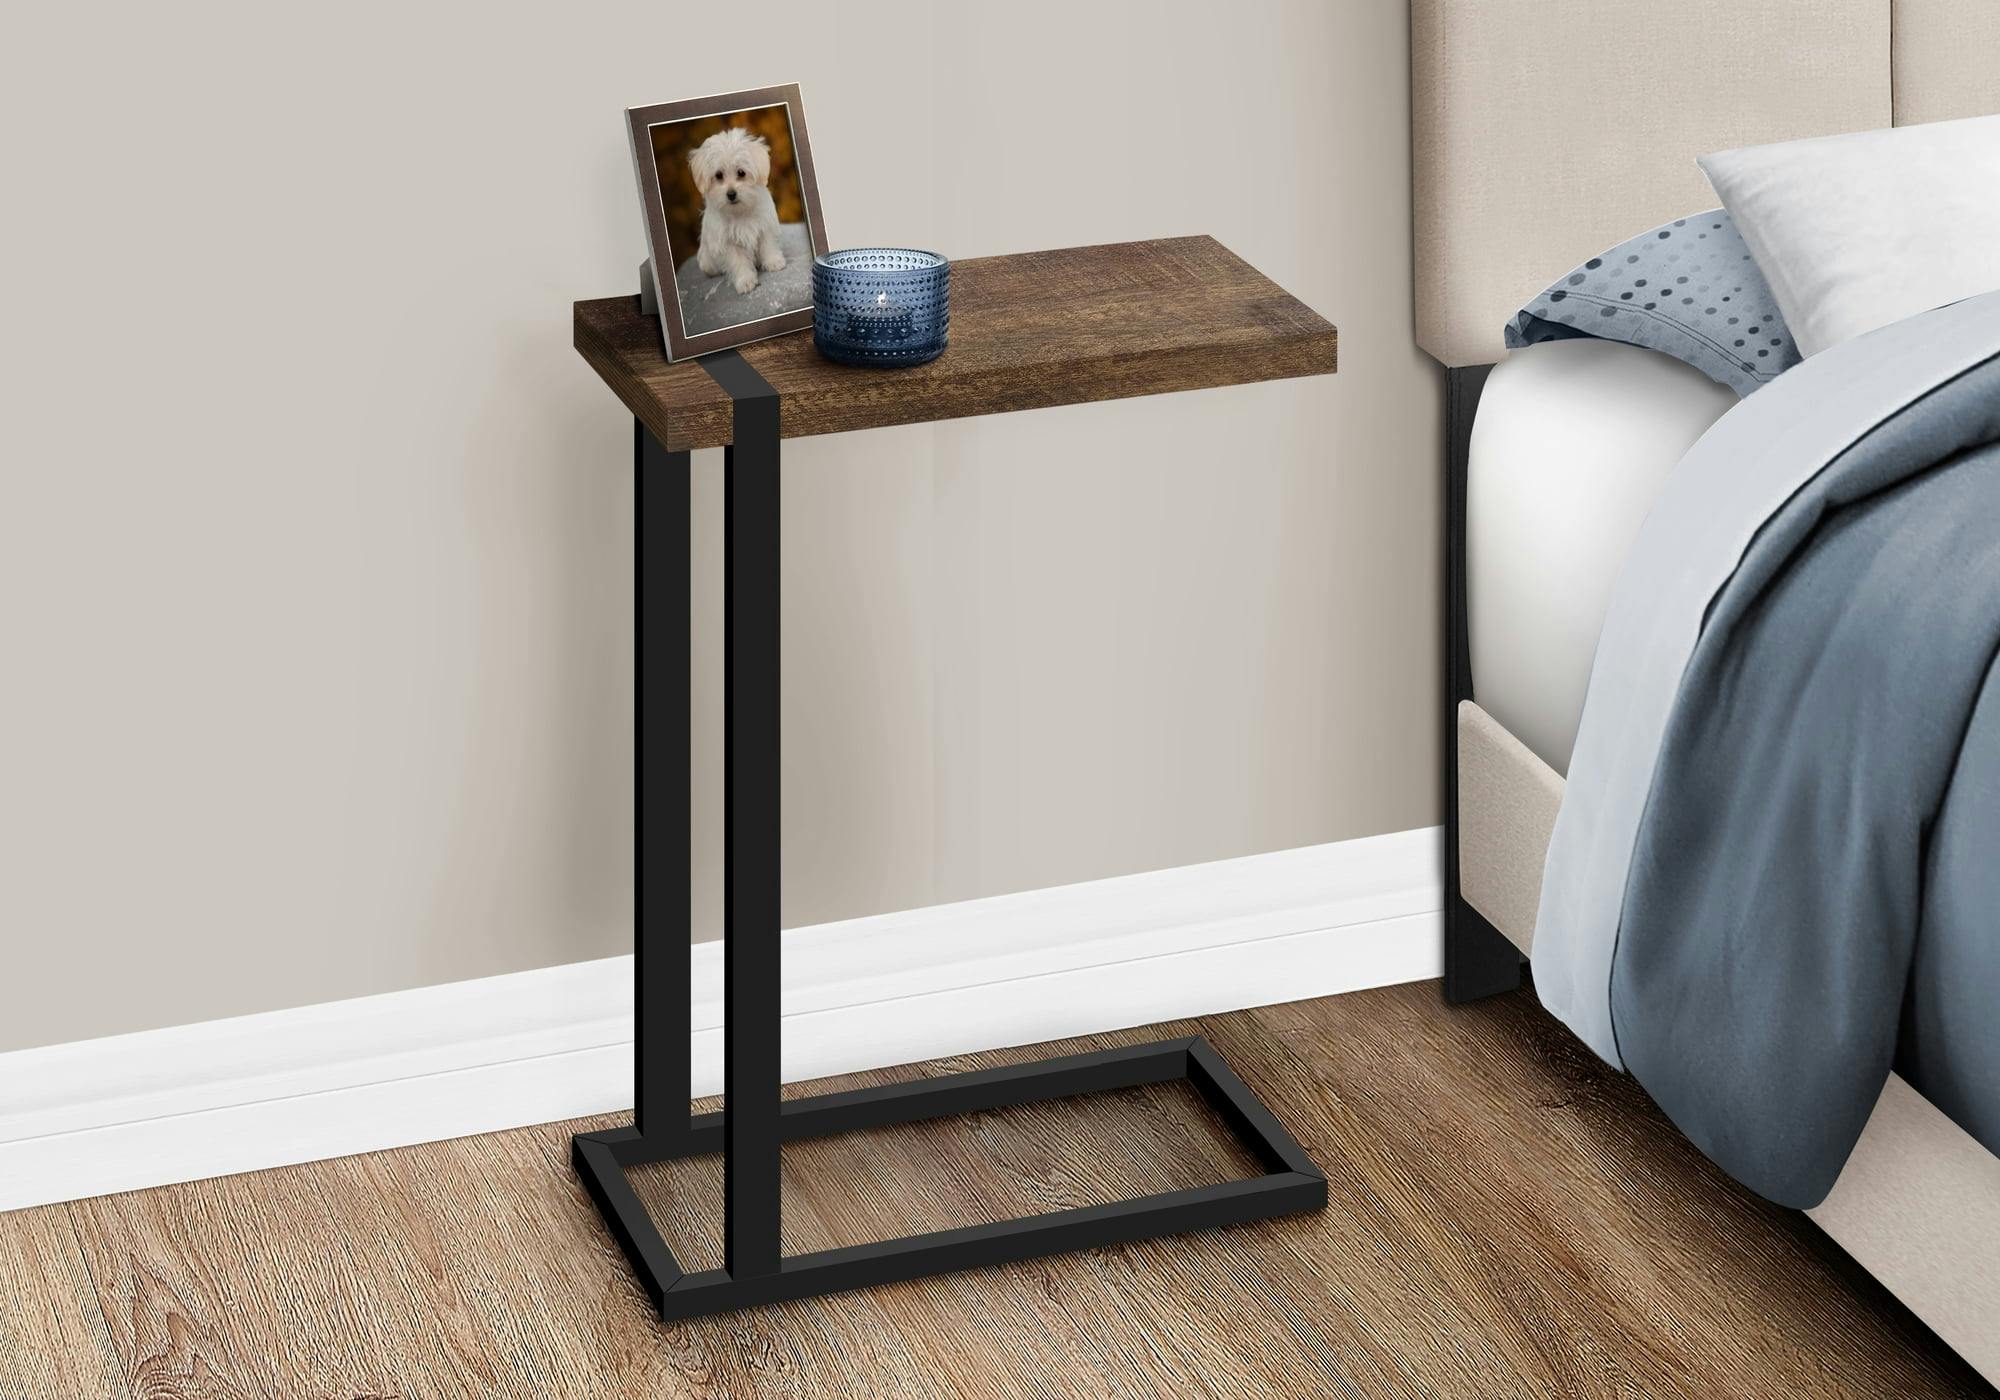 Contemporary C-Shaped Accent Table in Brown Reclaimed Wood-Look with Black Metal Frame